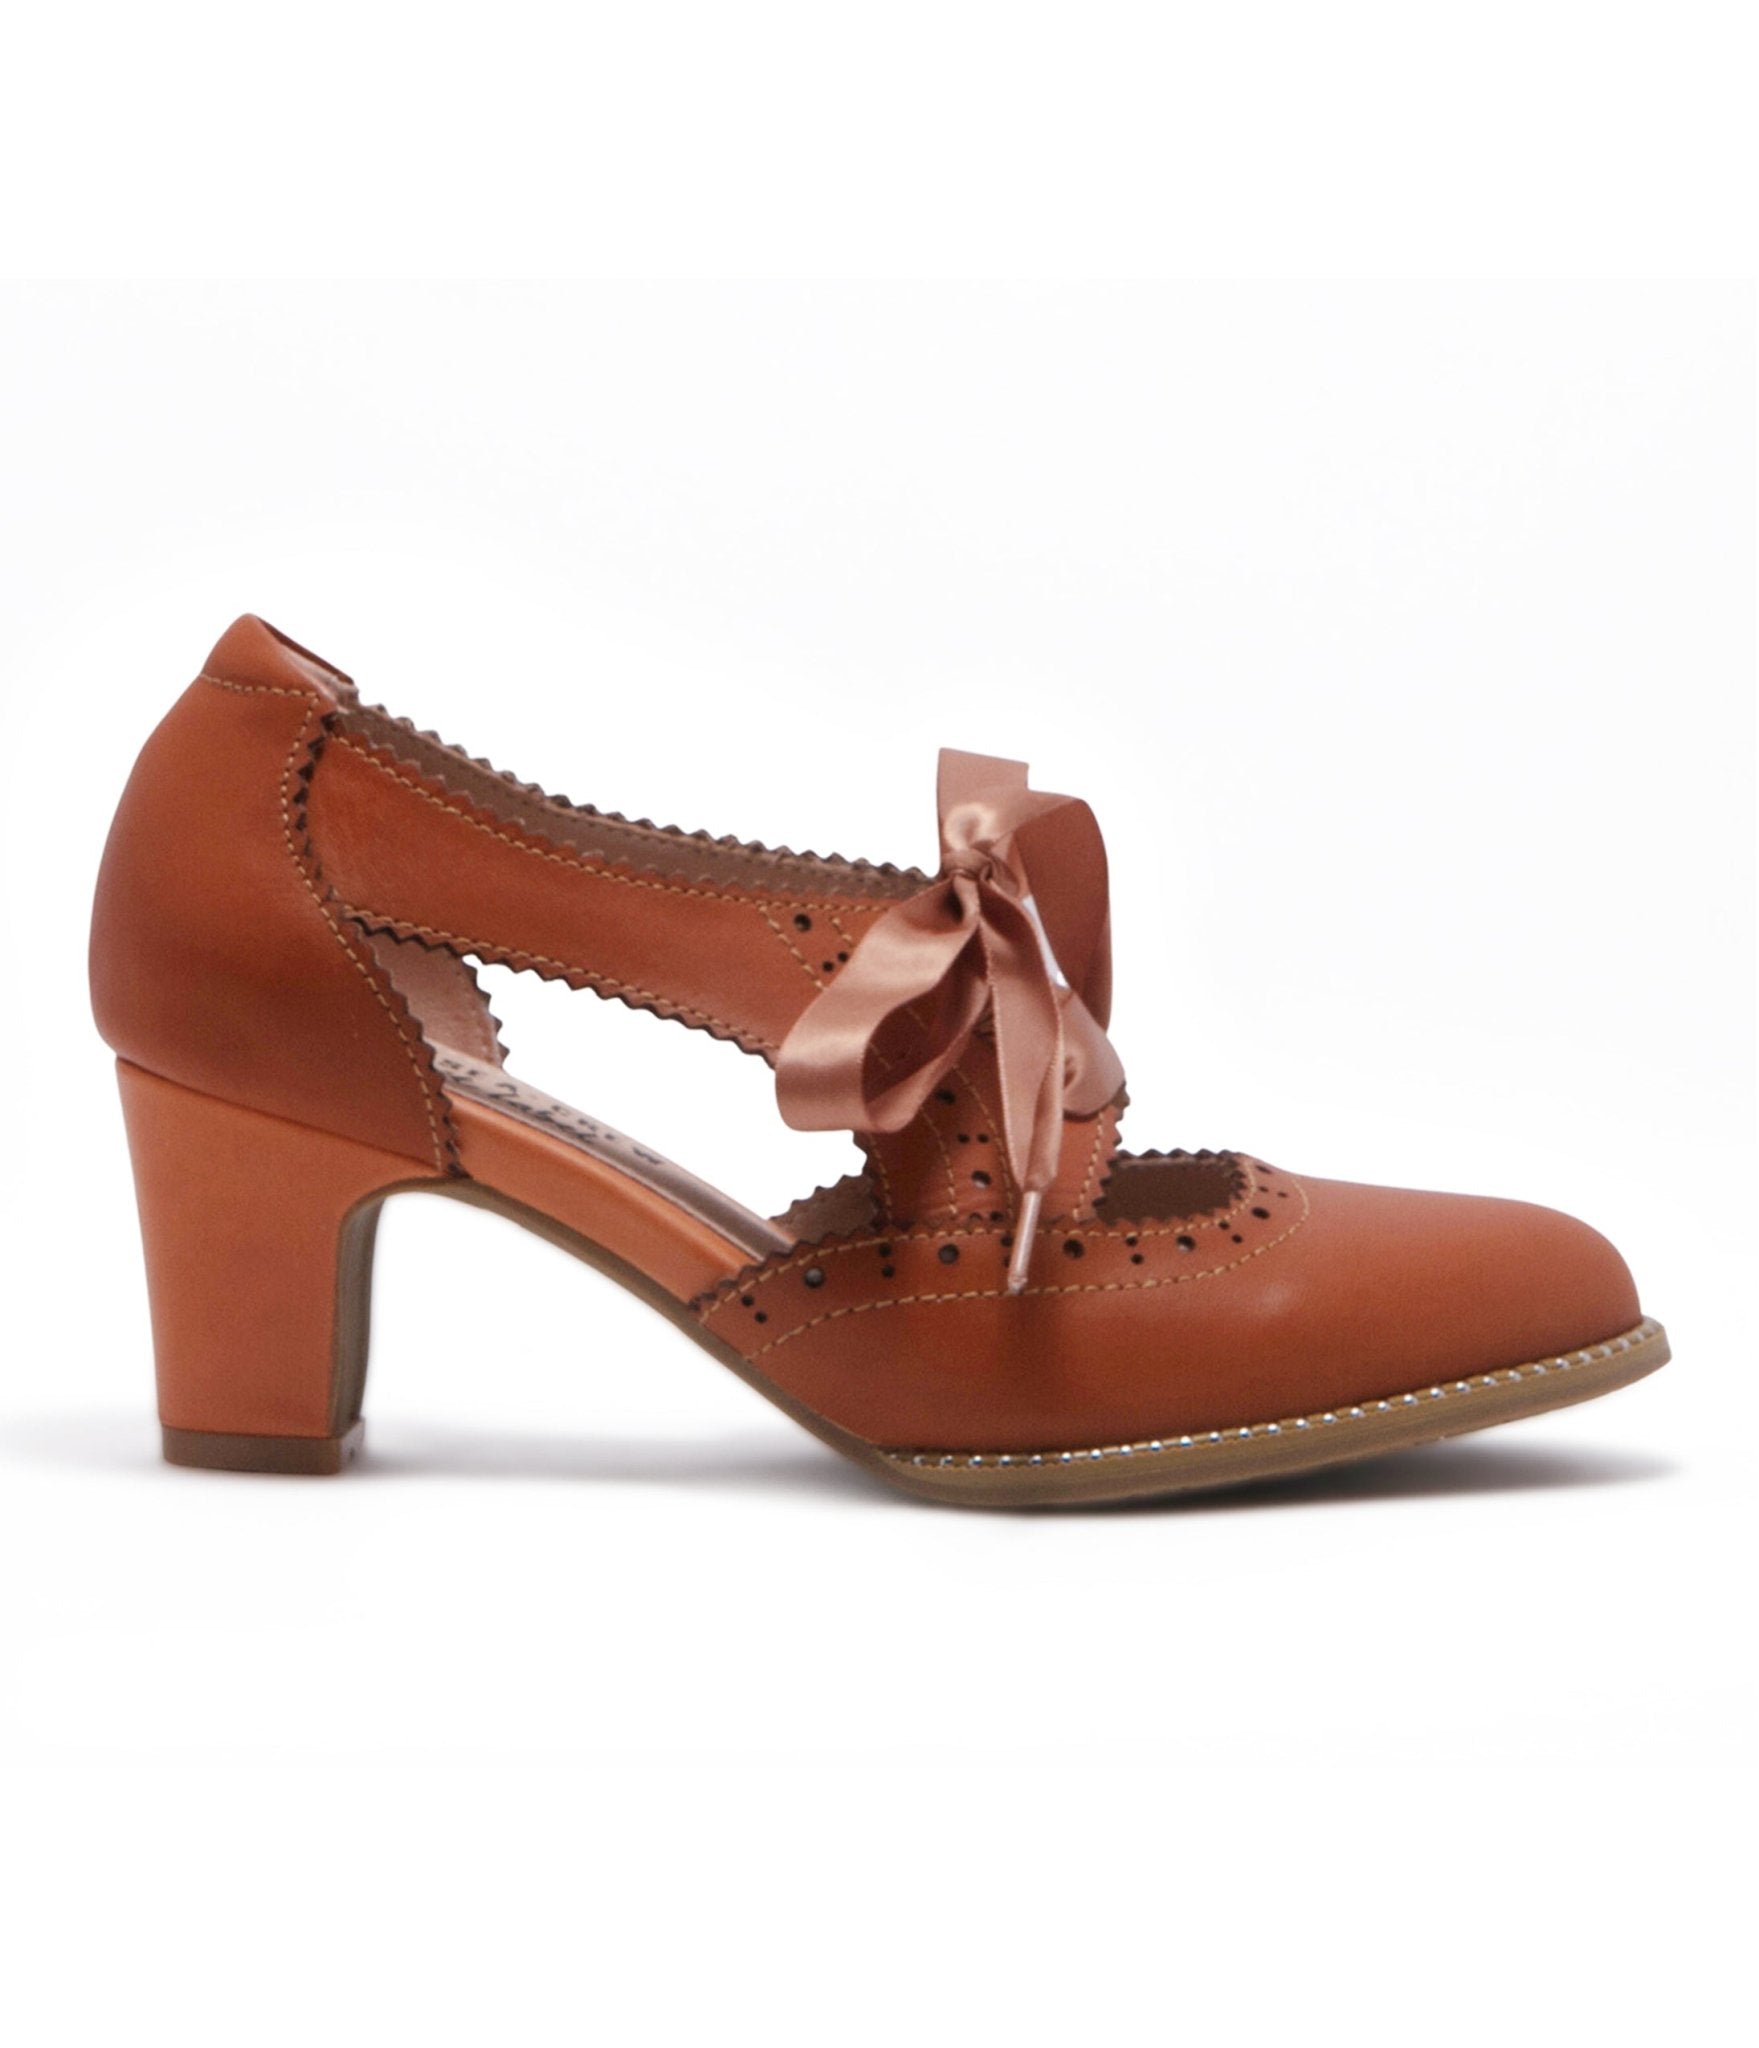 

Chelsea Crew 1930S Tan Leather Bow Oxford Heels